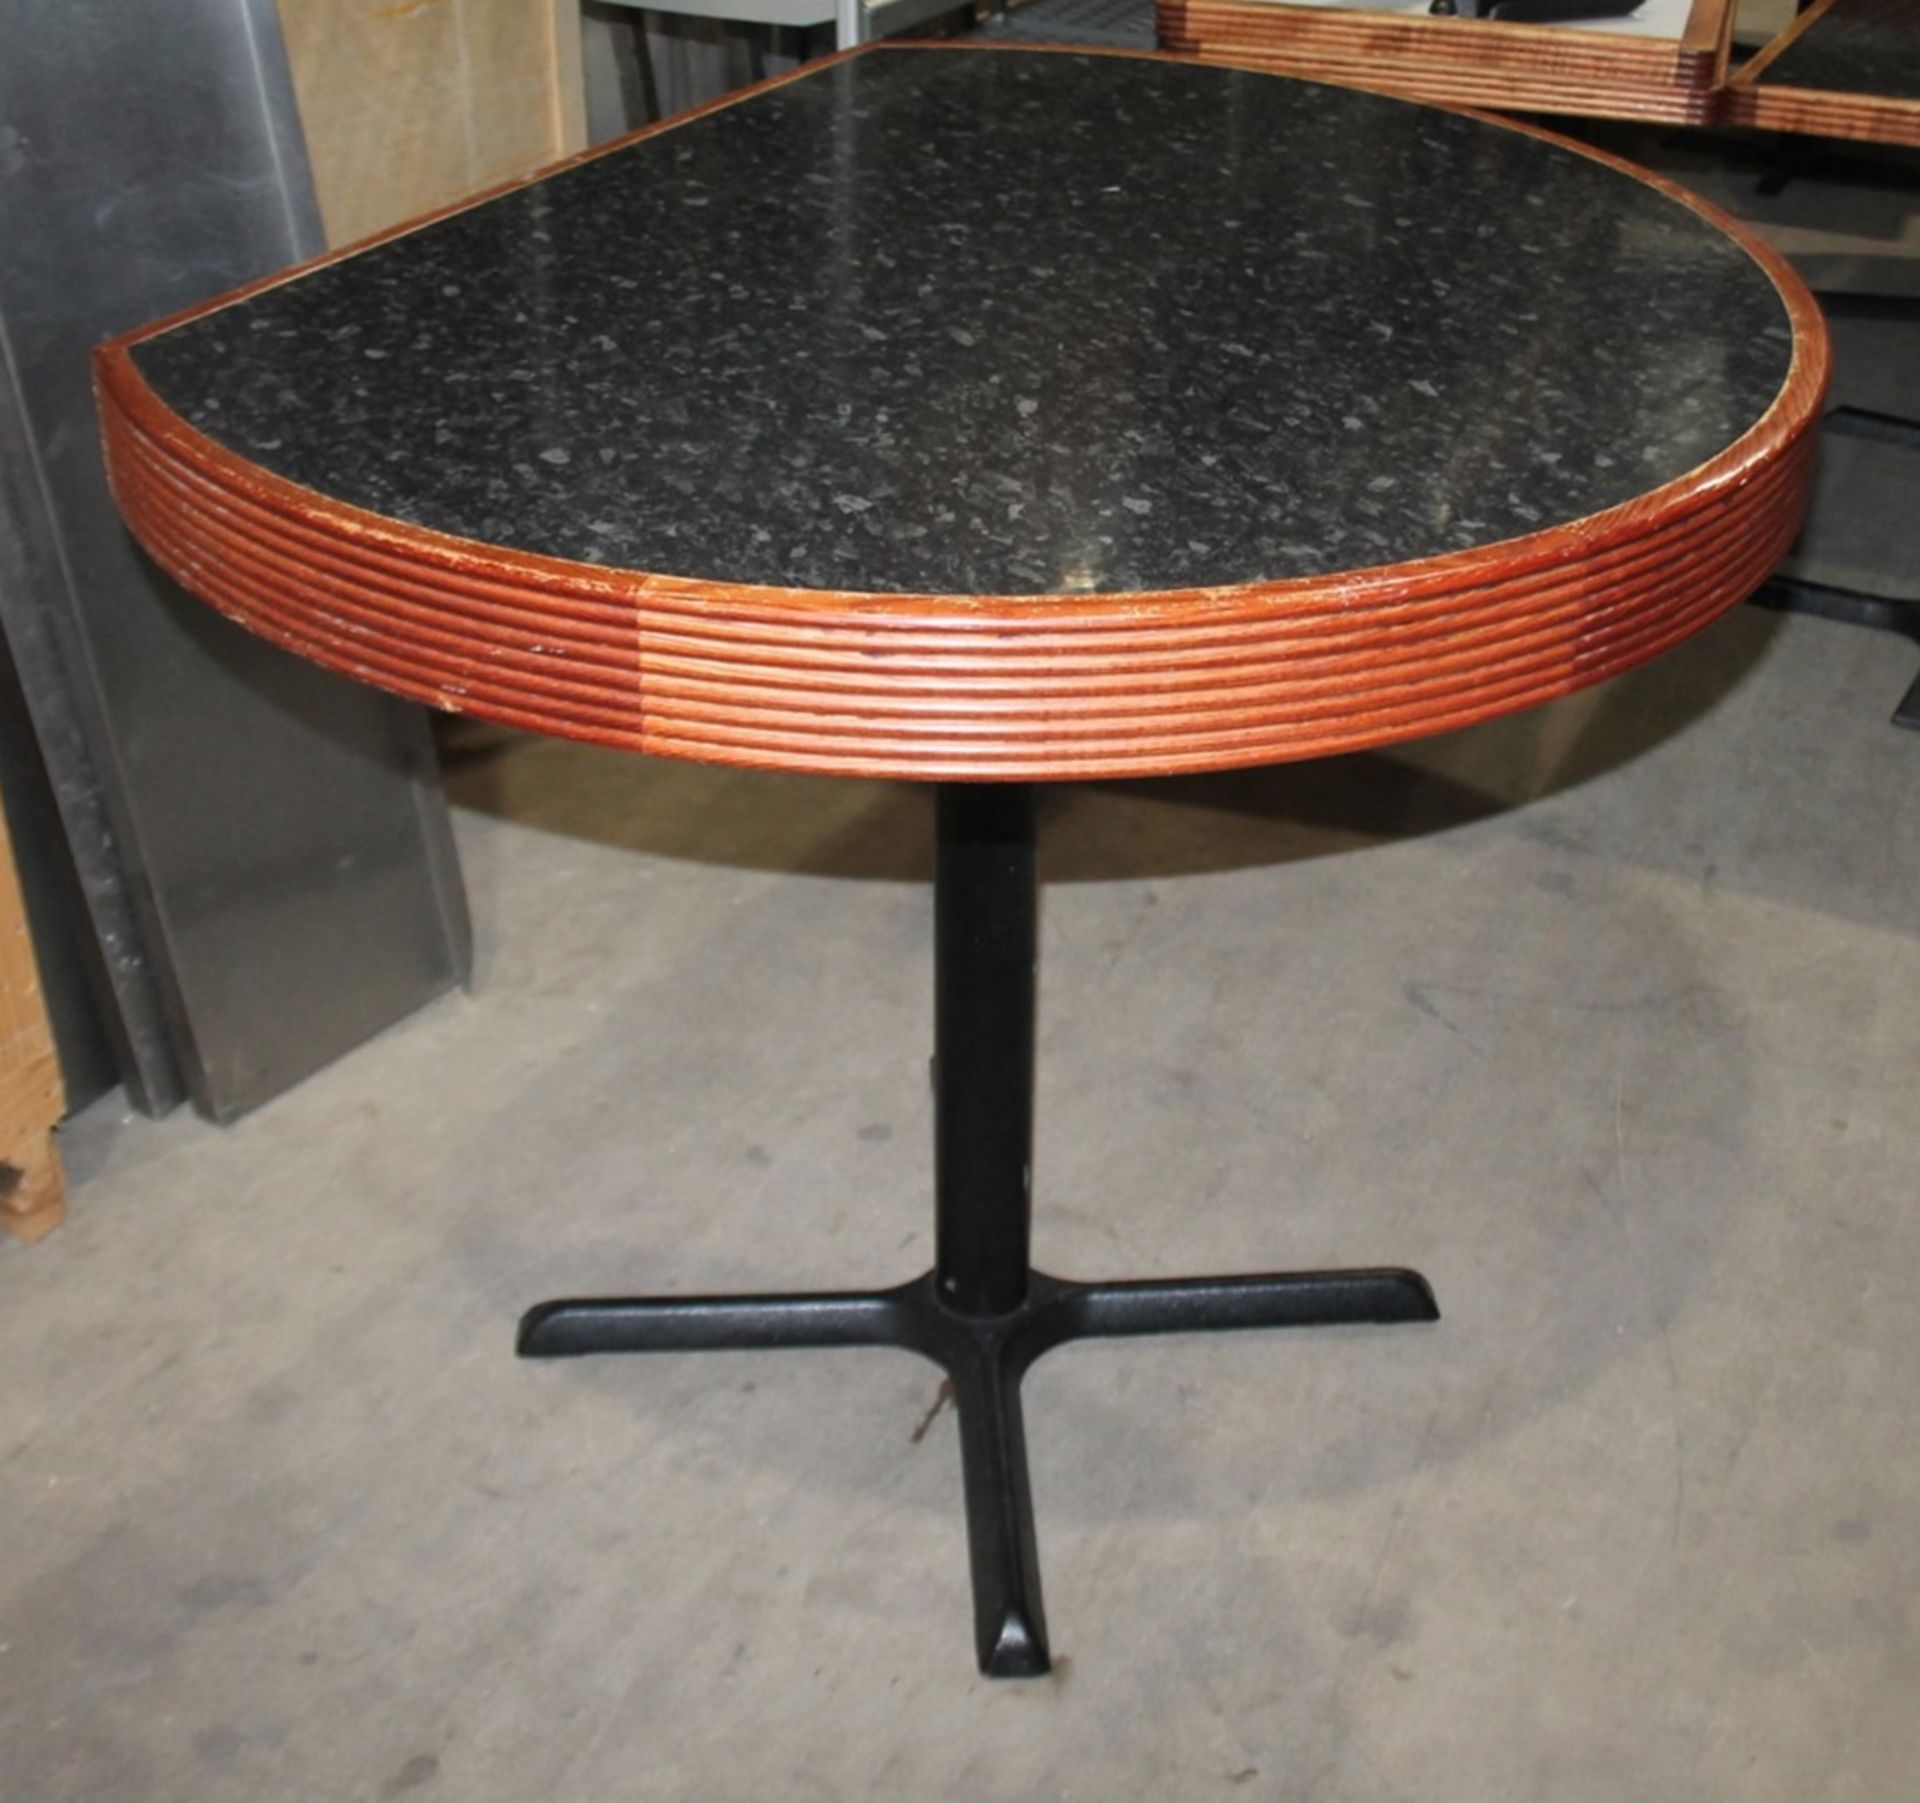 2 x Restaurant Semi-Circle Dining Tables With Granite Style Surface, Wooden Edging and Cast Iron - Image 3 of 4